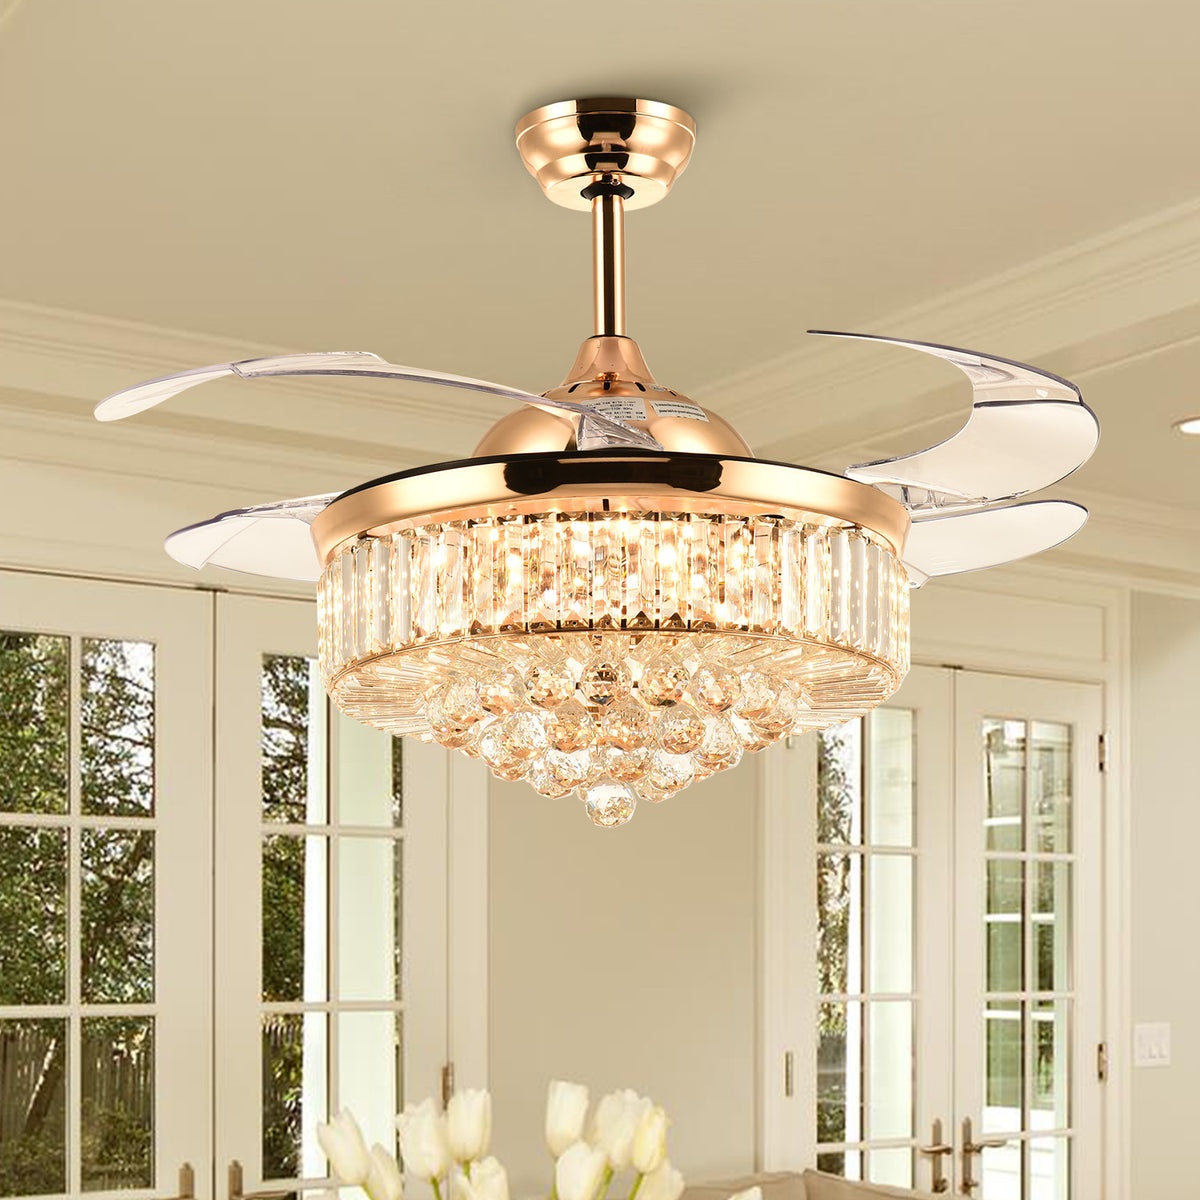 42''Reversible Chandelier Crystal Ceiling Fan with Lights, Stepless Dimming  Modern Ceiling Fan Remote Control Retractable Invisible Blades, 6 Speeds  Indoor Fandelier Kits for Living Room Bedroom 